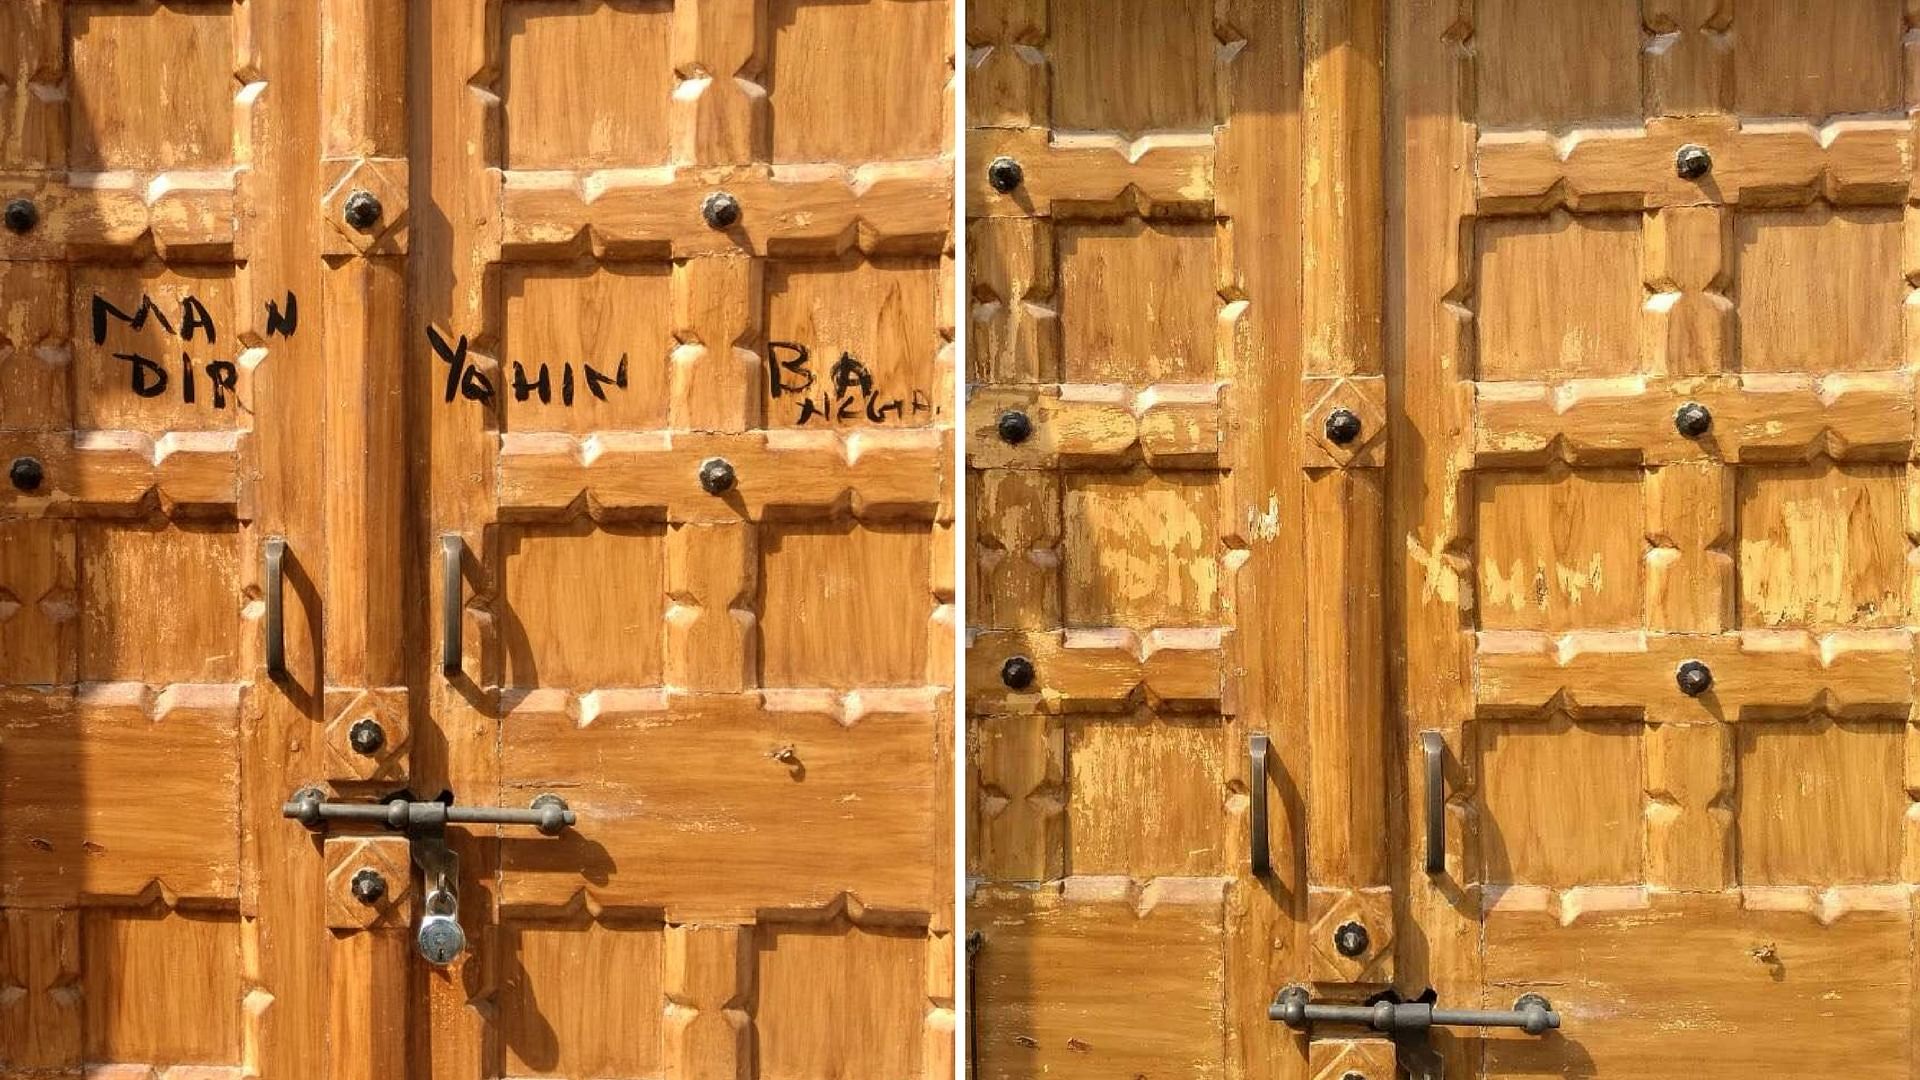 ‘Mandir yahin banega’ (‘The temple will be constructed here’) scribbled on the door (left), the chapel door after the slogan was scraped out (right). &nbsp;